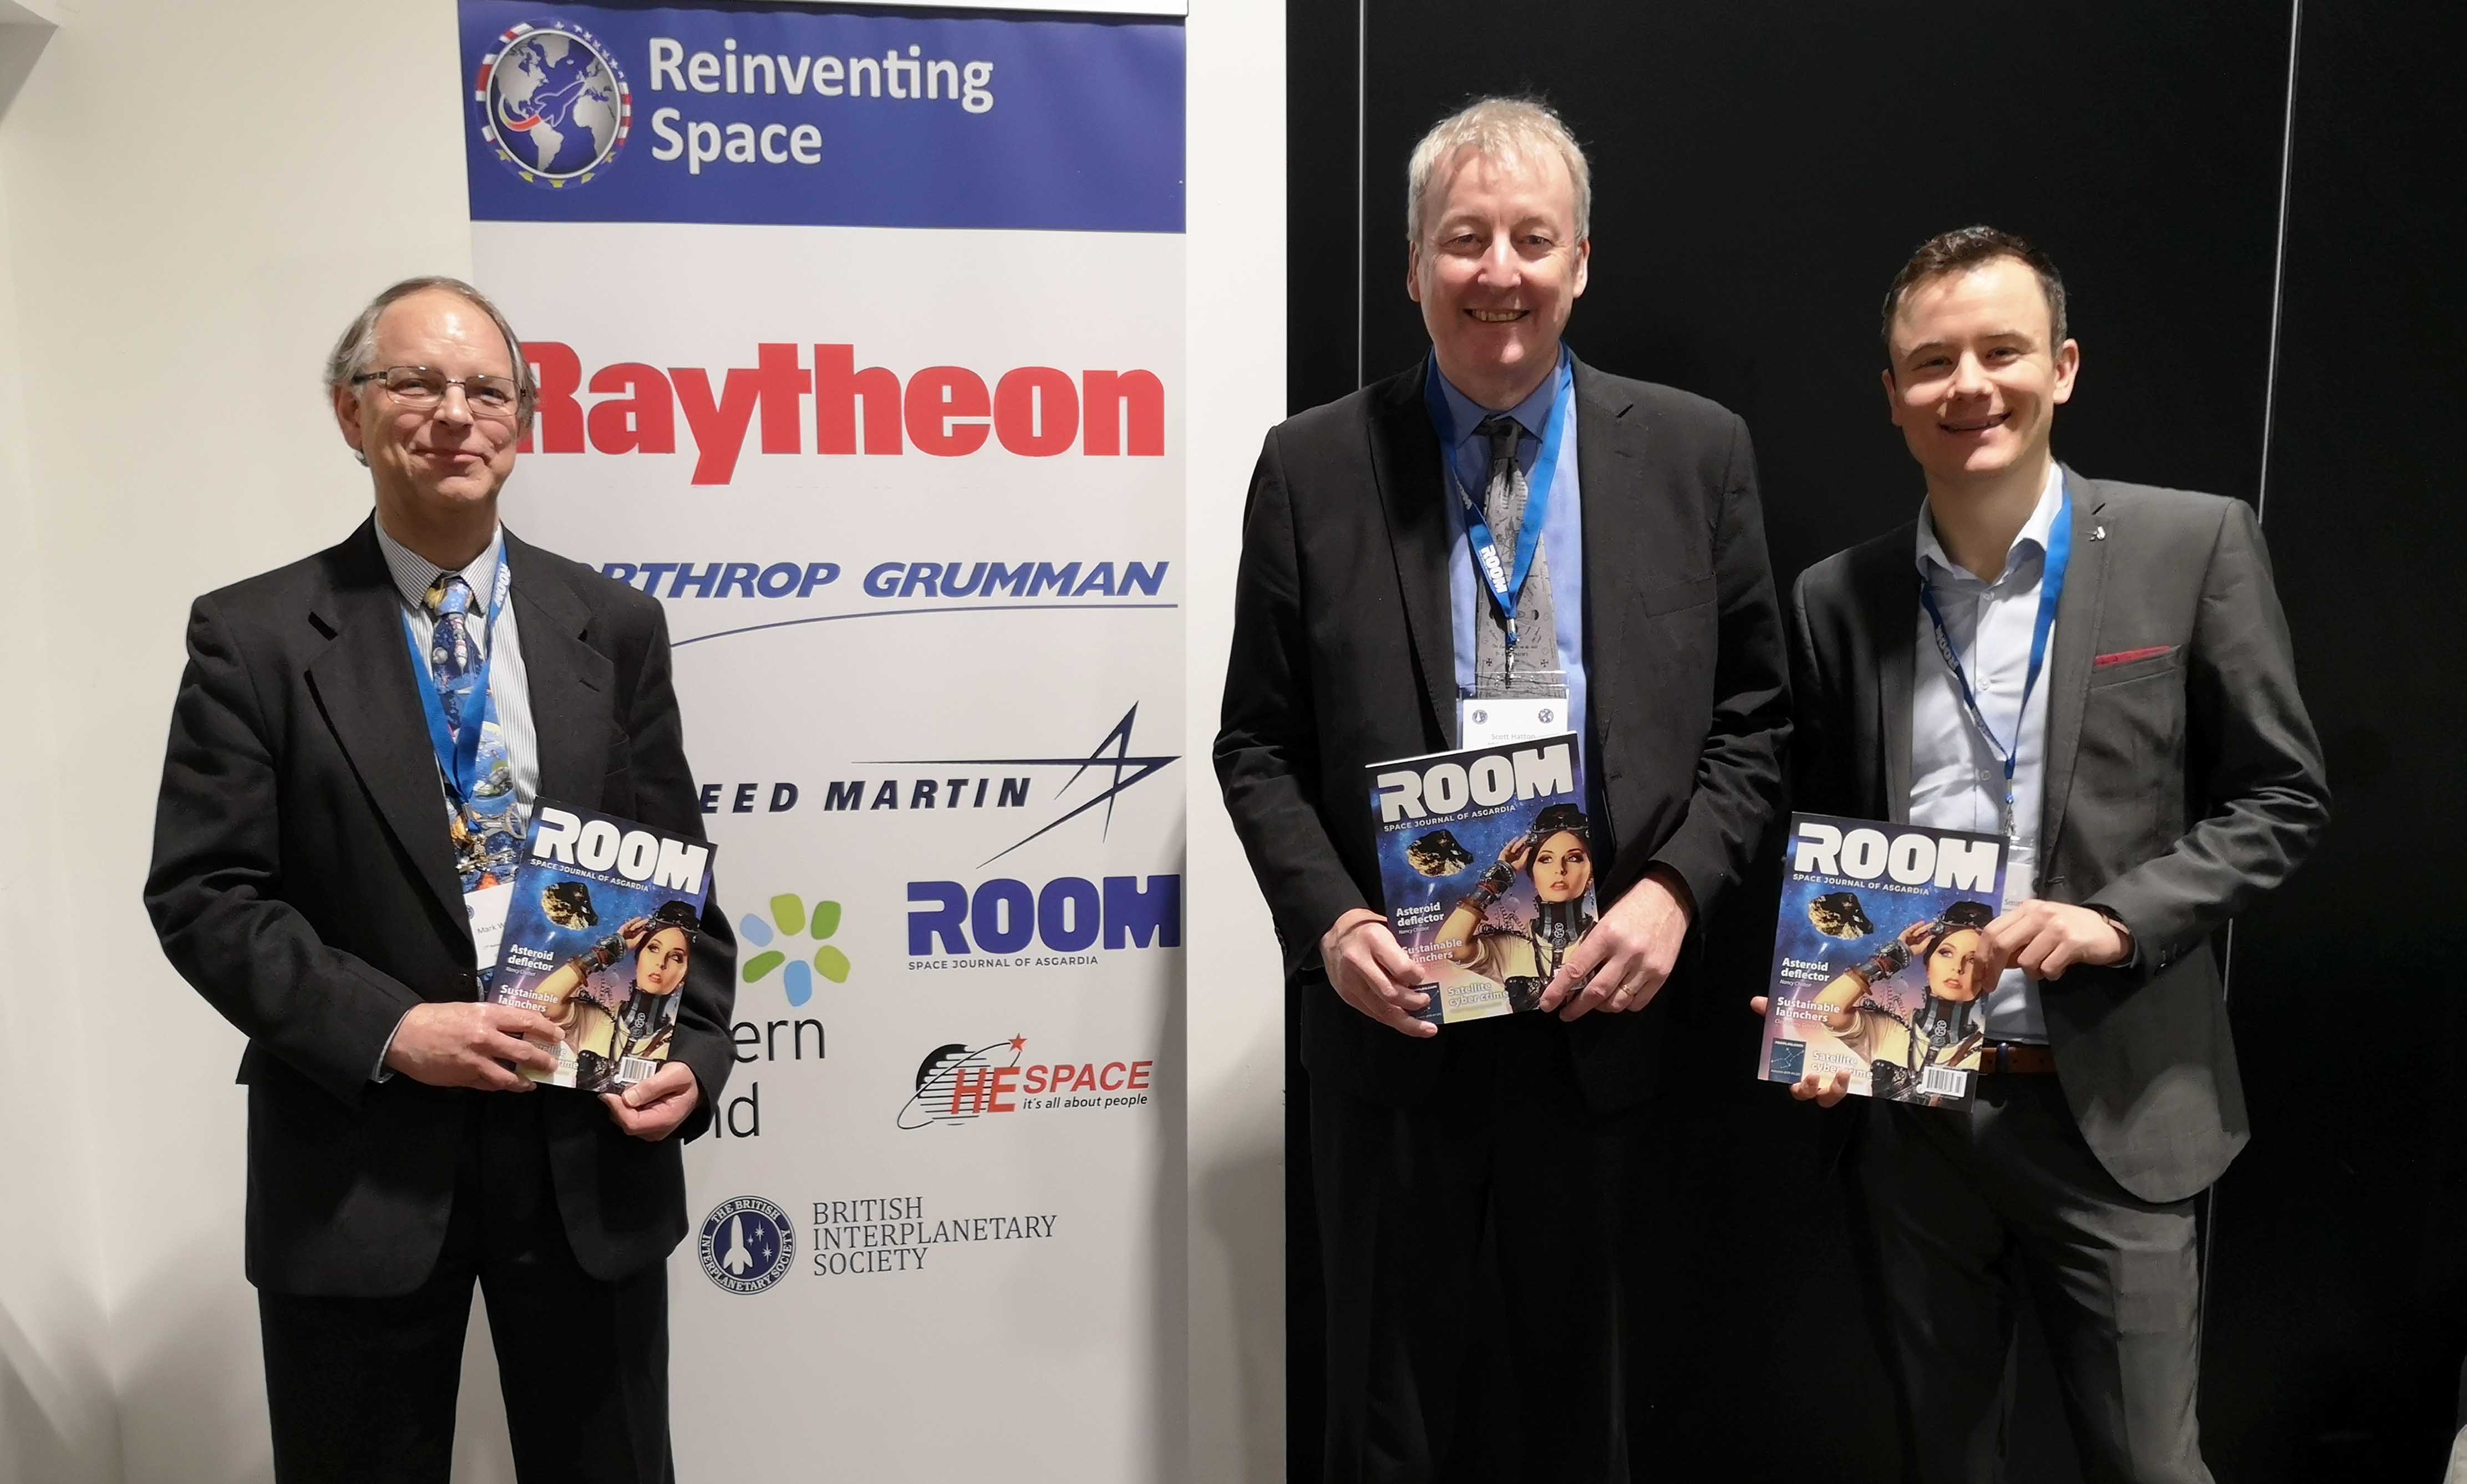 AstroAgency’s Daniel Smith (right) pictured with writer Scott Hatton (centre) and ROOM editor Mark Williamson at the 2019 Reinventing Space Conference.